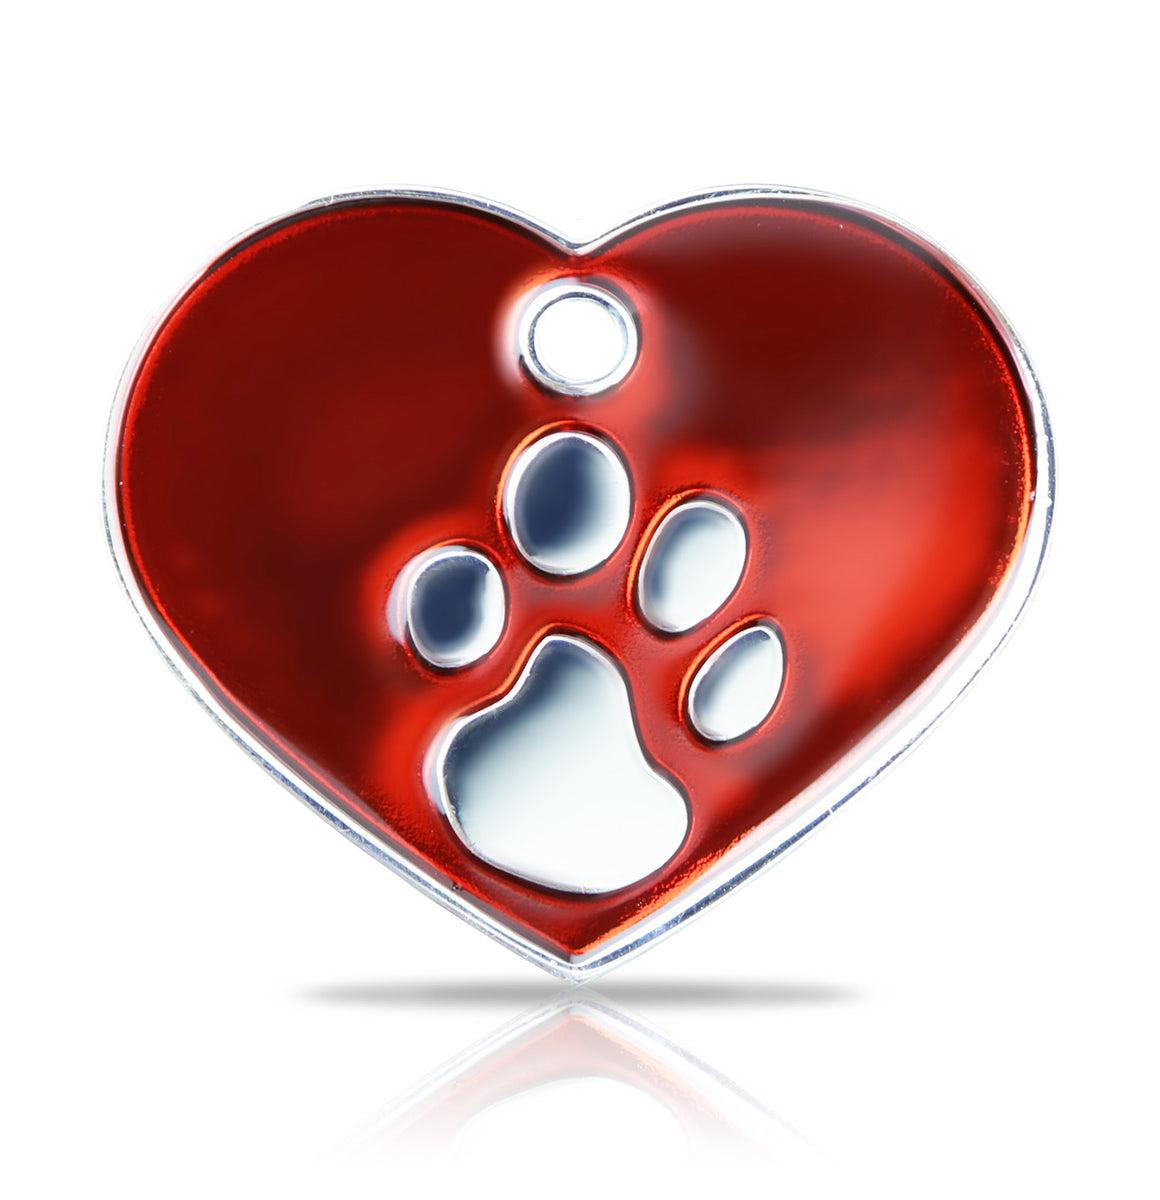 TaggIT Elegance Large Heart Red & Silver iMarc Pet Tag